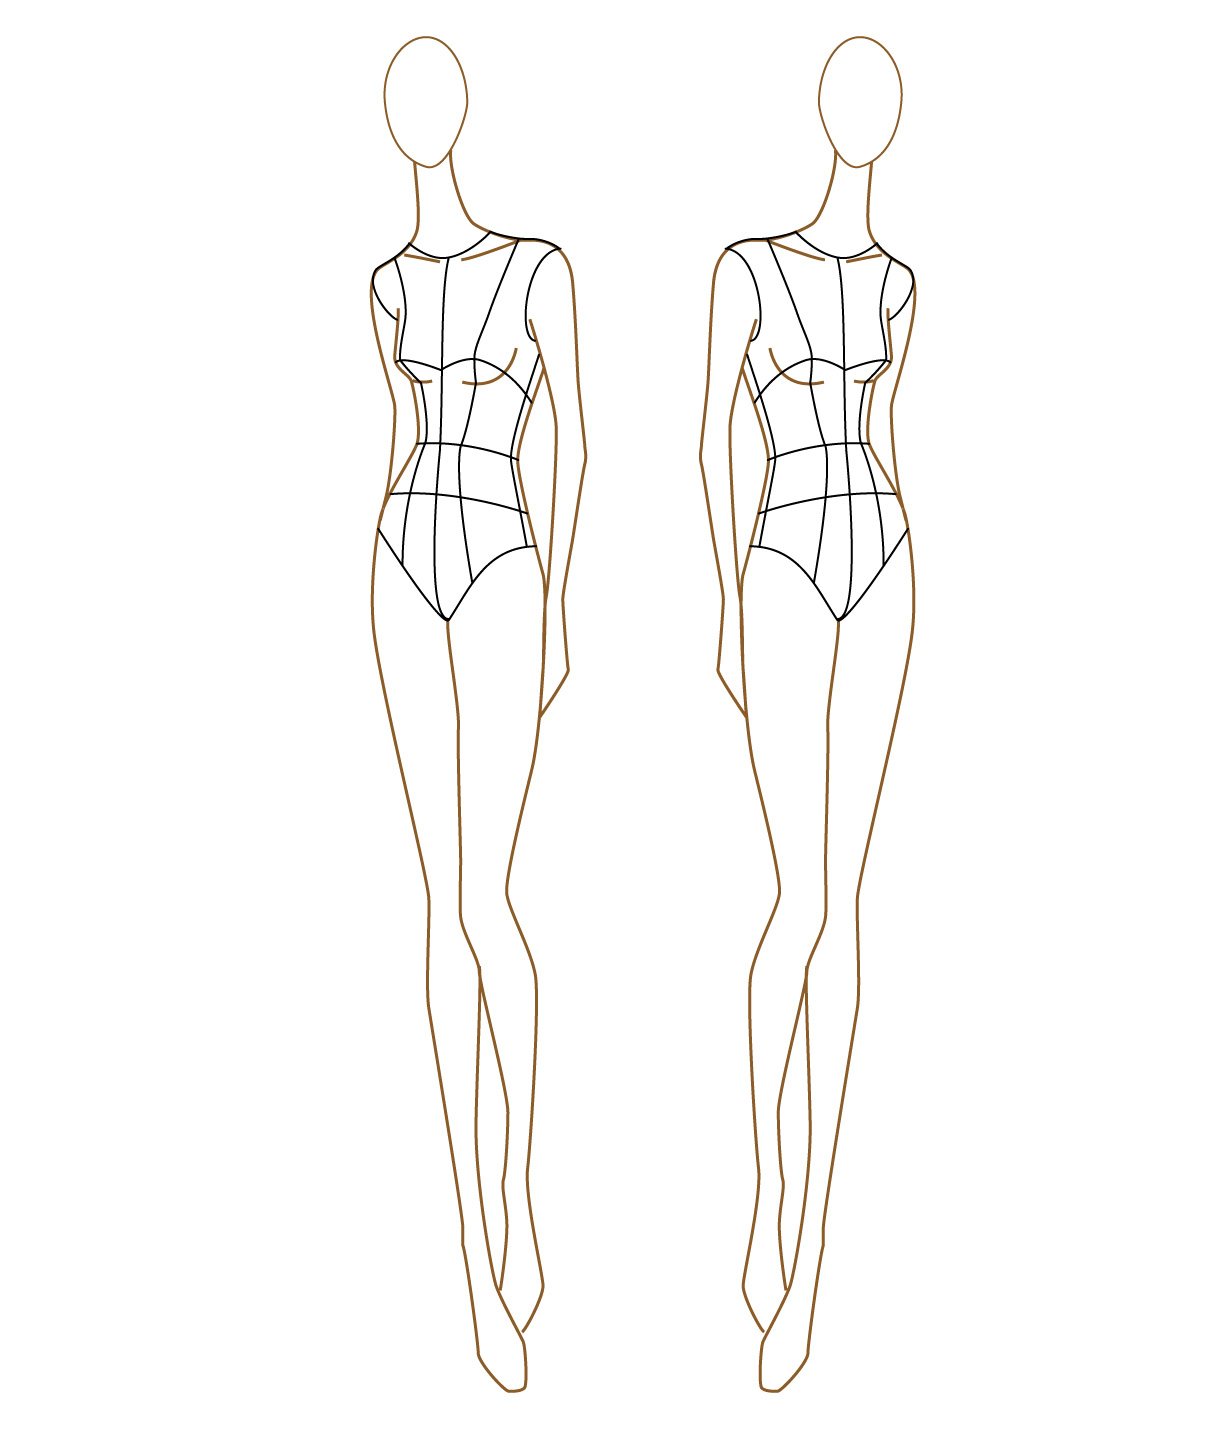 2 Drawing Mannequin Fashion Design For Free Download On Ayoqq - Free Printable Fashion Model Templates